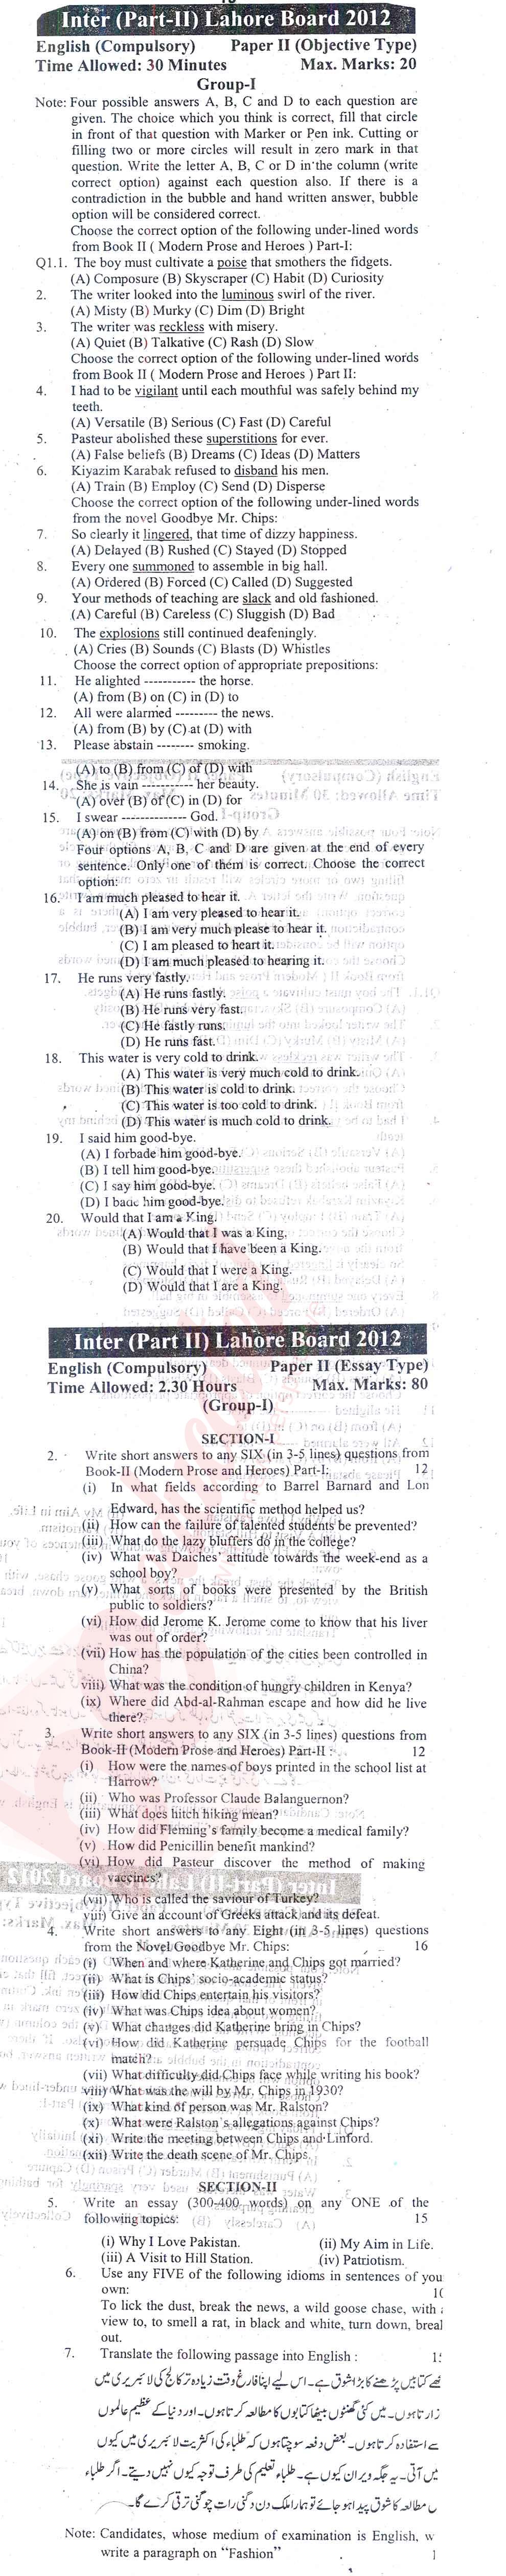 English 12th class Past Paper Group 1 BISE Lahore 2012